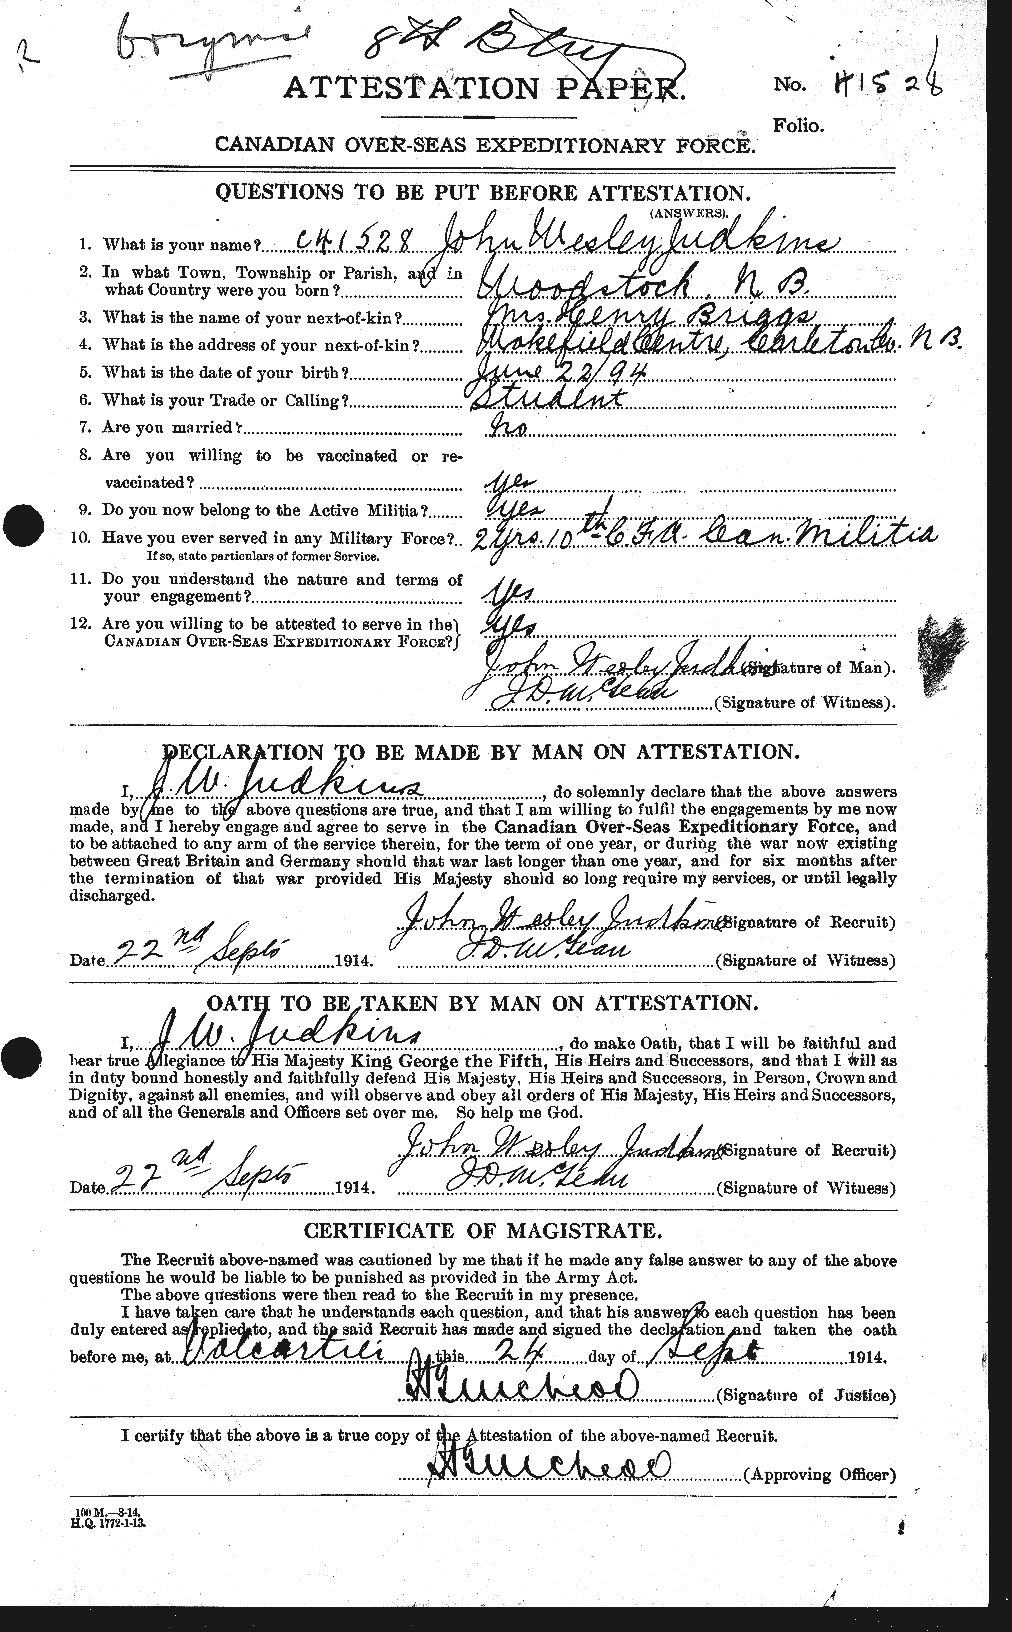 Personnel Records of the First World War - CEF 425060a